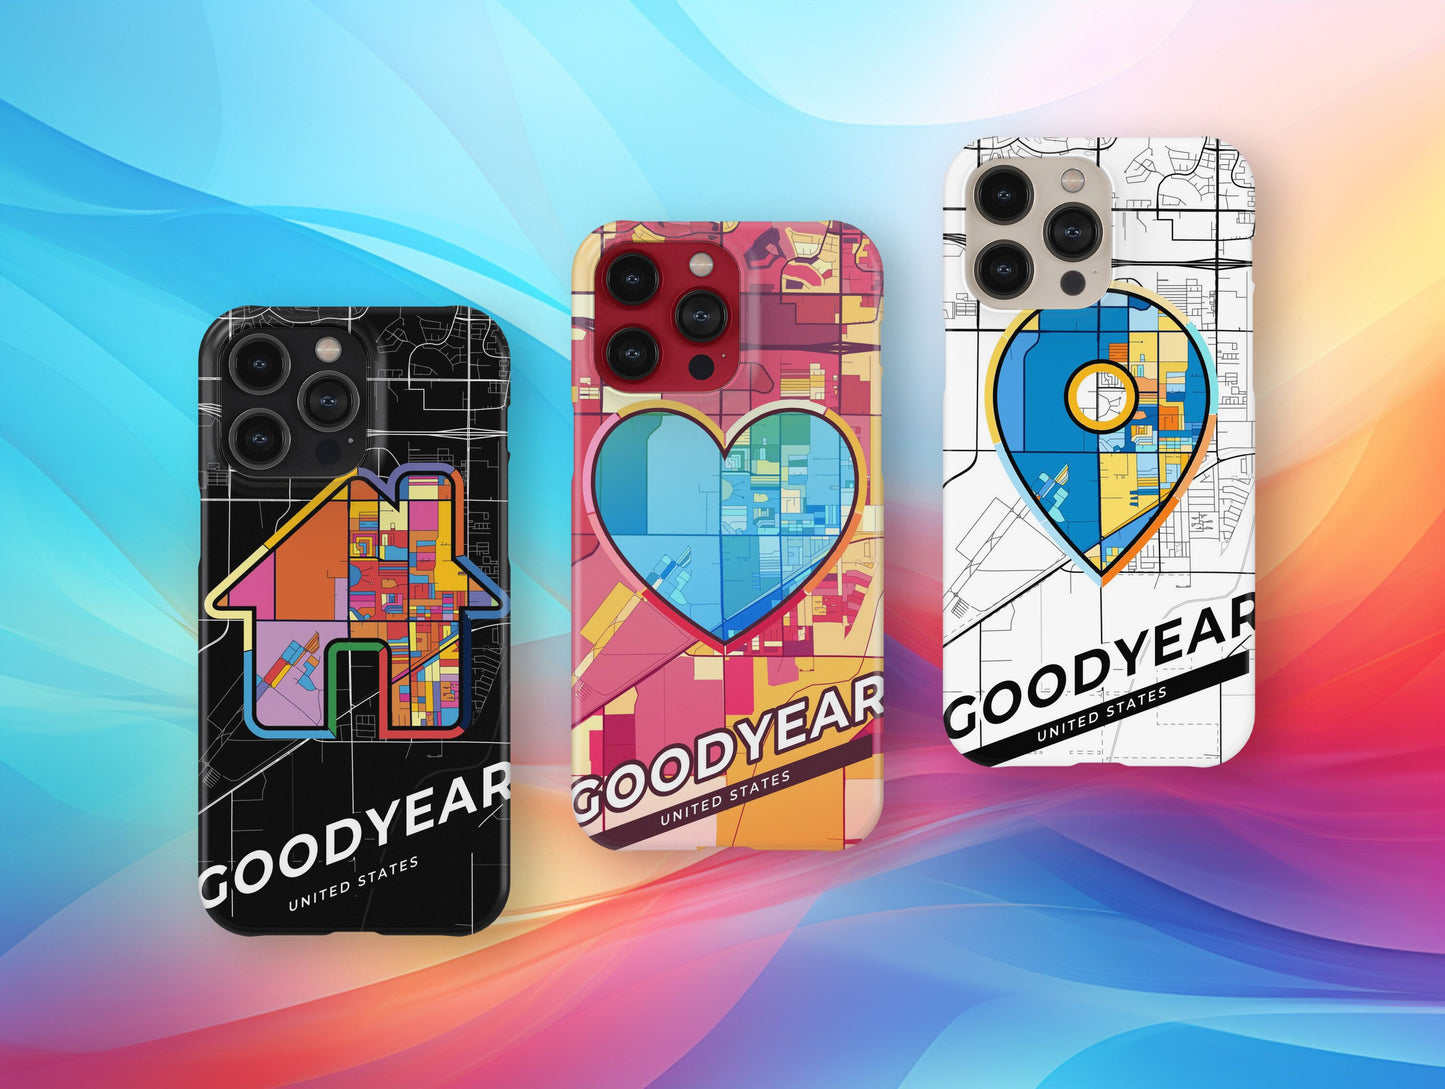 Goodyear Arizona slim phone case with colorful icon. Birthday, wedding or housewarming gift. Couple match cases.